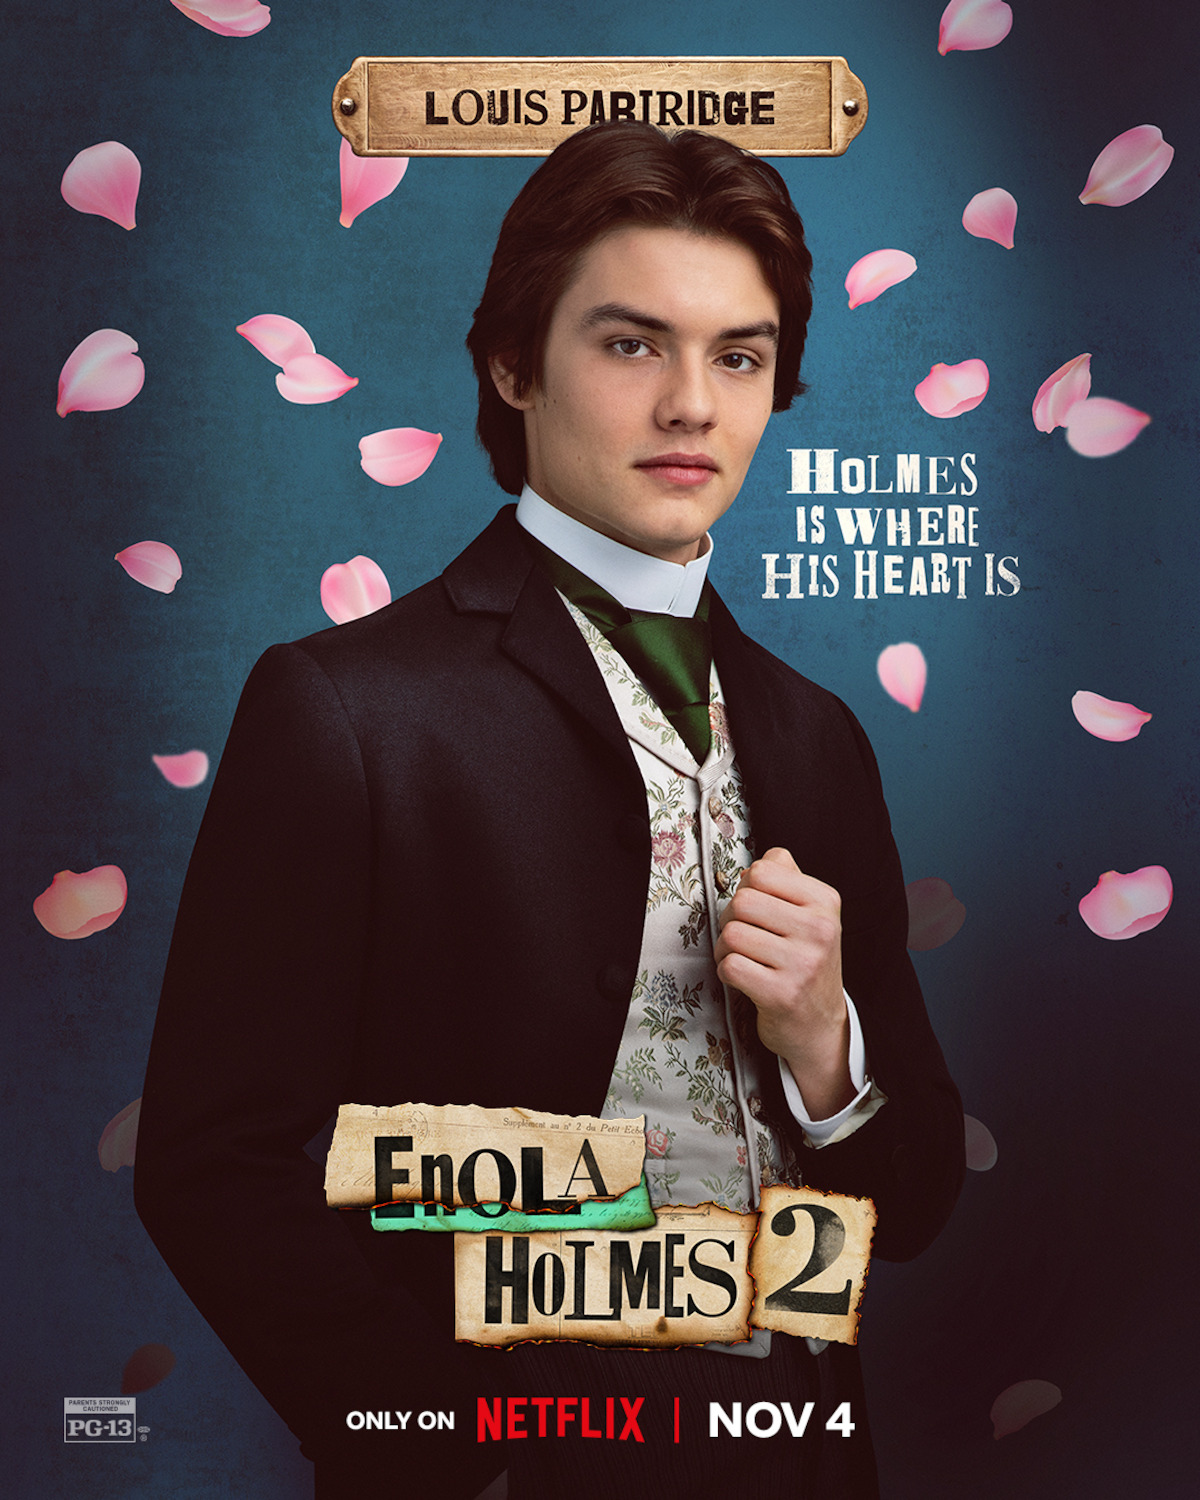 Louis Partridge, the cutie in Enola Holmes, is the 'actor to watch